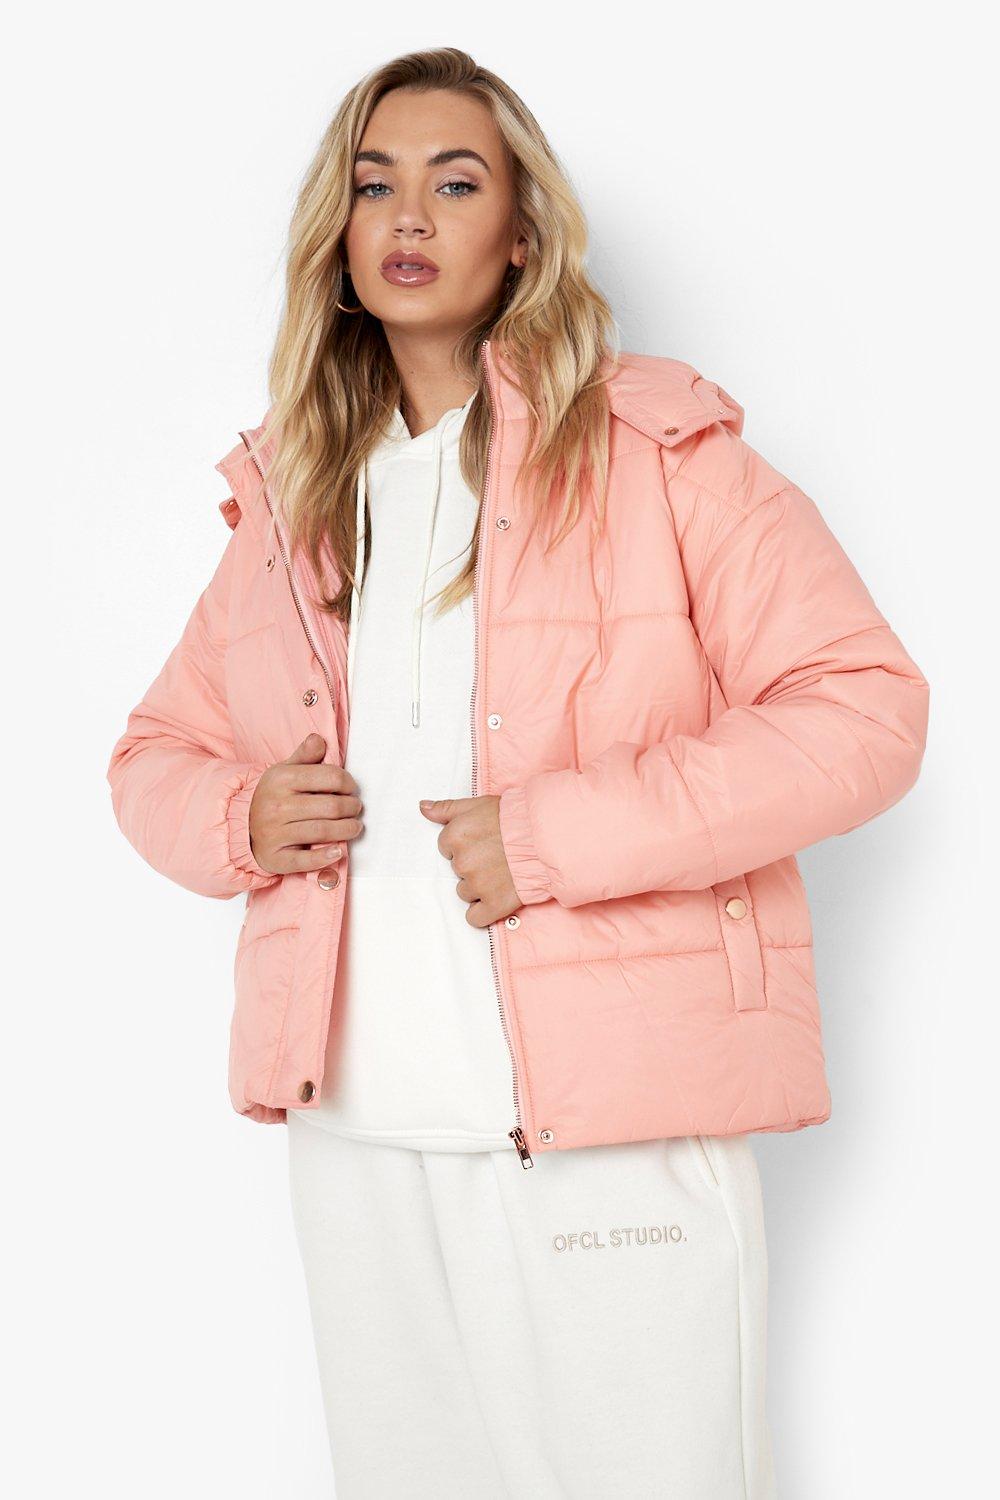 12 Puffer Coats That Are Actually Cute